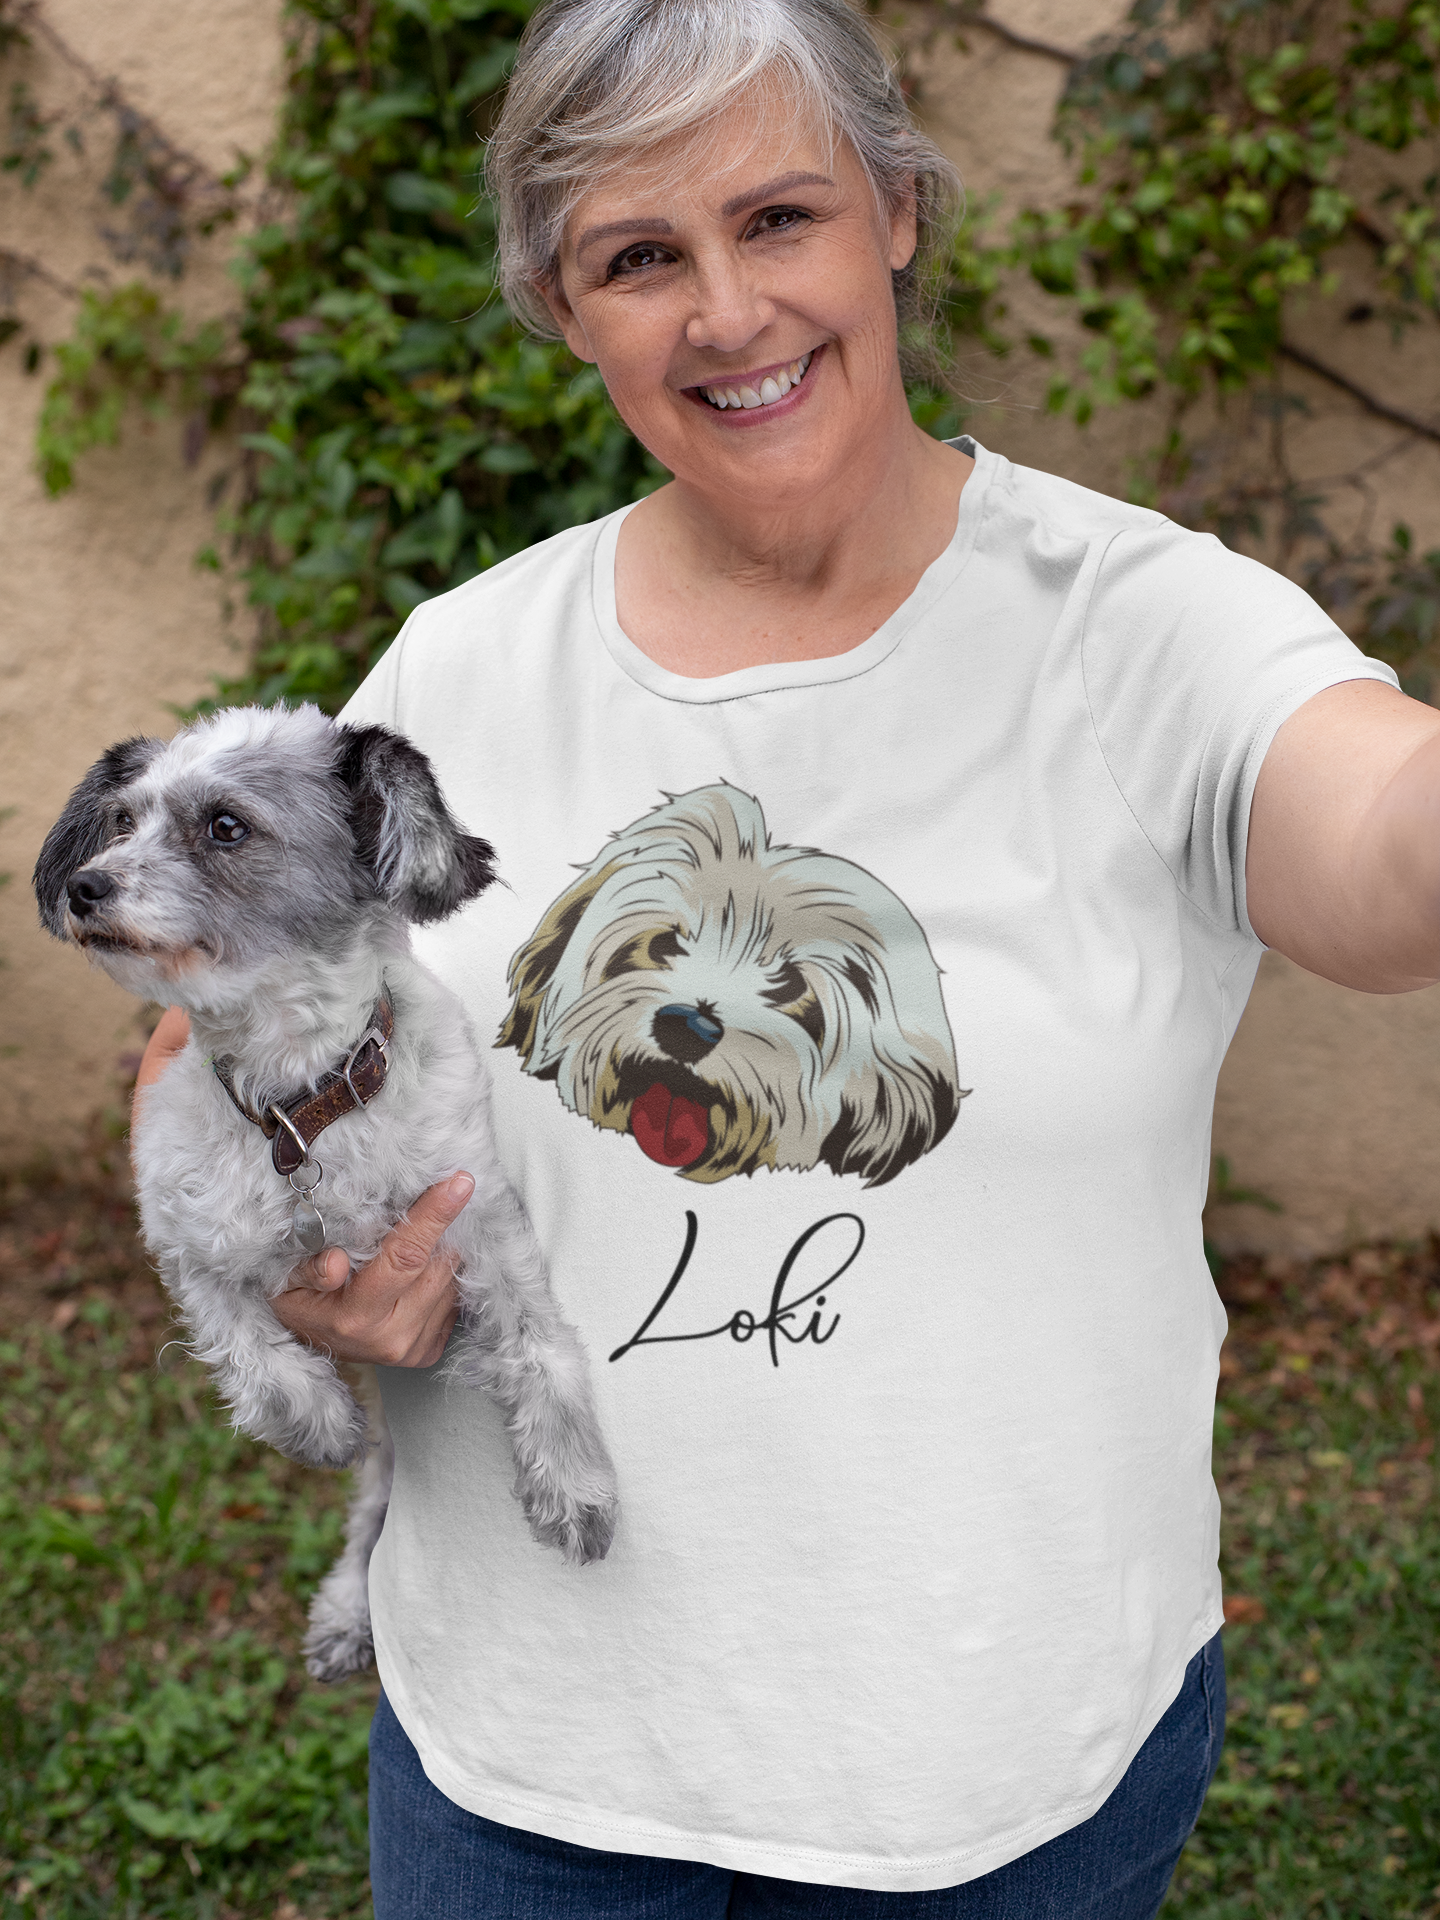 https://cuztomthreadz.com/wp-content/uploads/2022/10/t-shirt-mockup-of-a-woman-taking-a-selfie-with-her-dog-32216.png